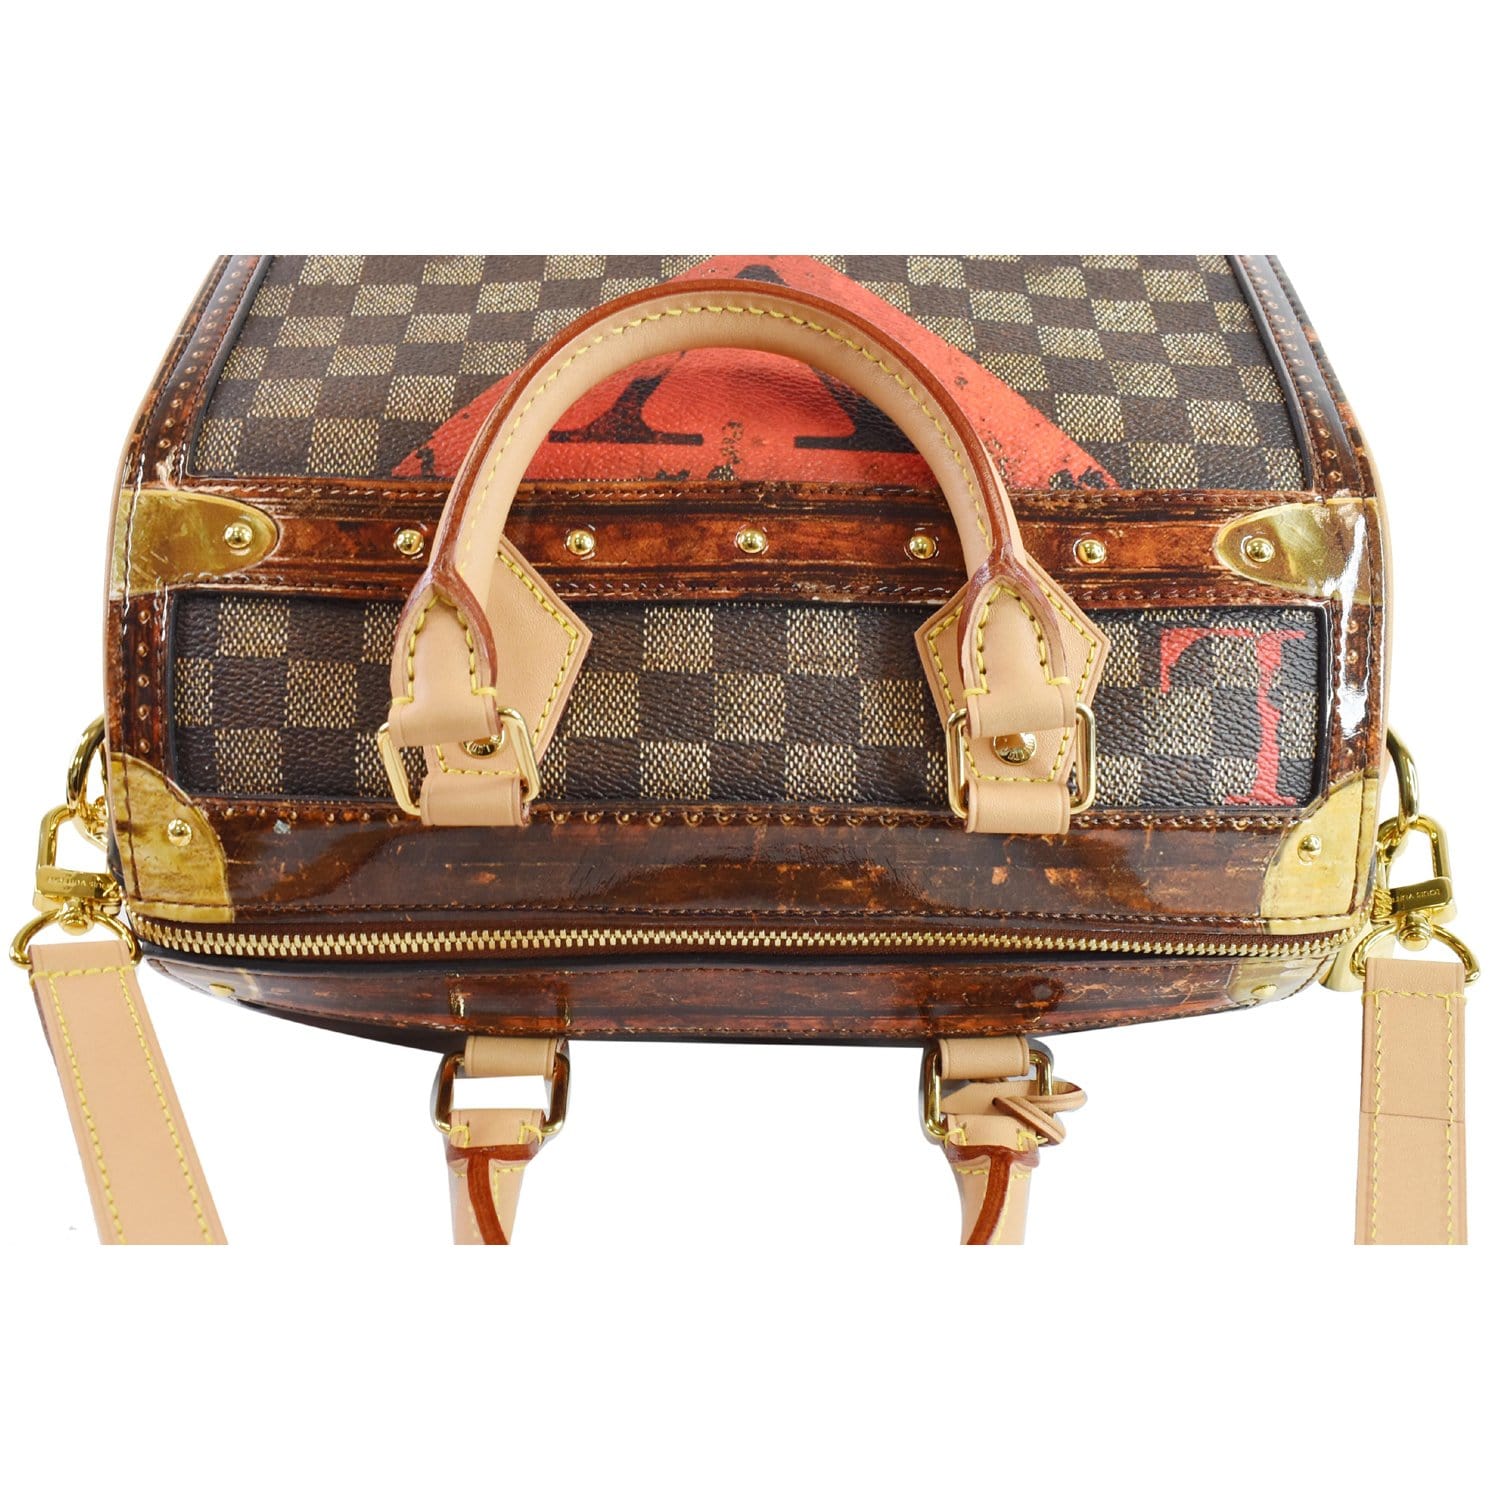 LOUIS VUITTON LIMITED EDITION TIME TRUNKS SPEEDY 25 BANDOLIERE – Shore Chic